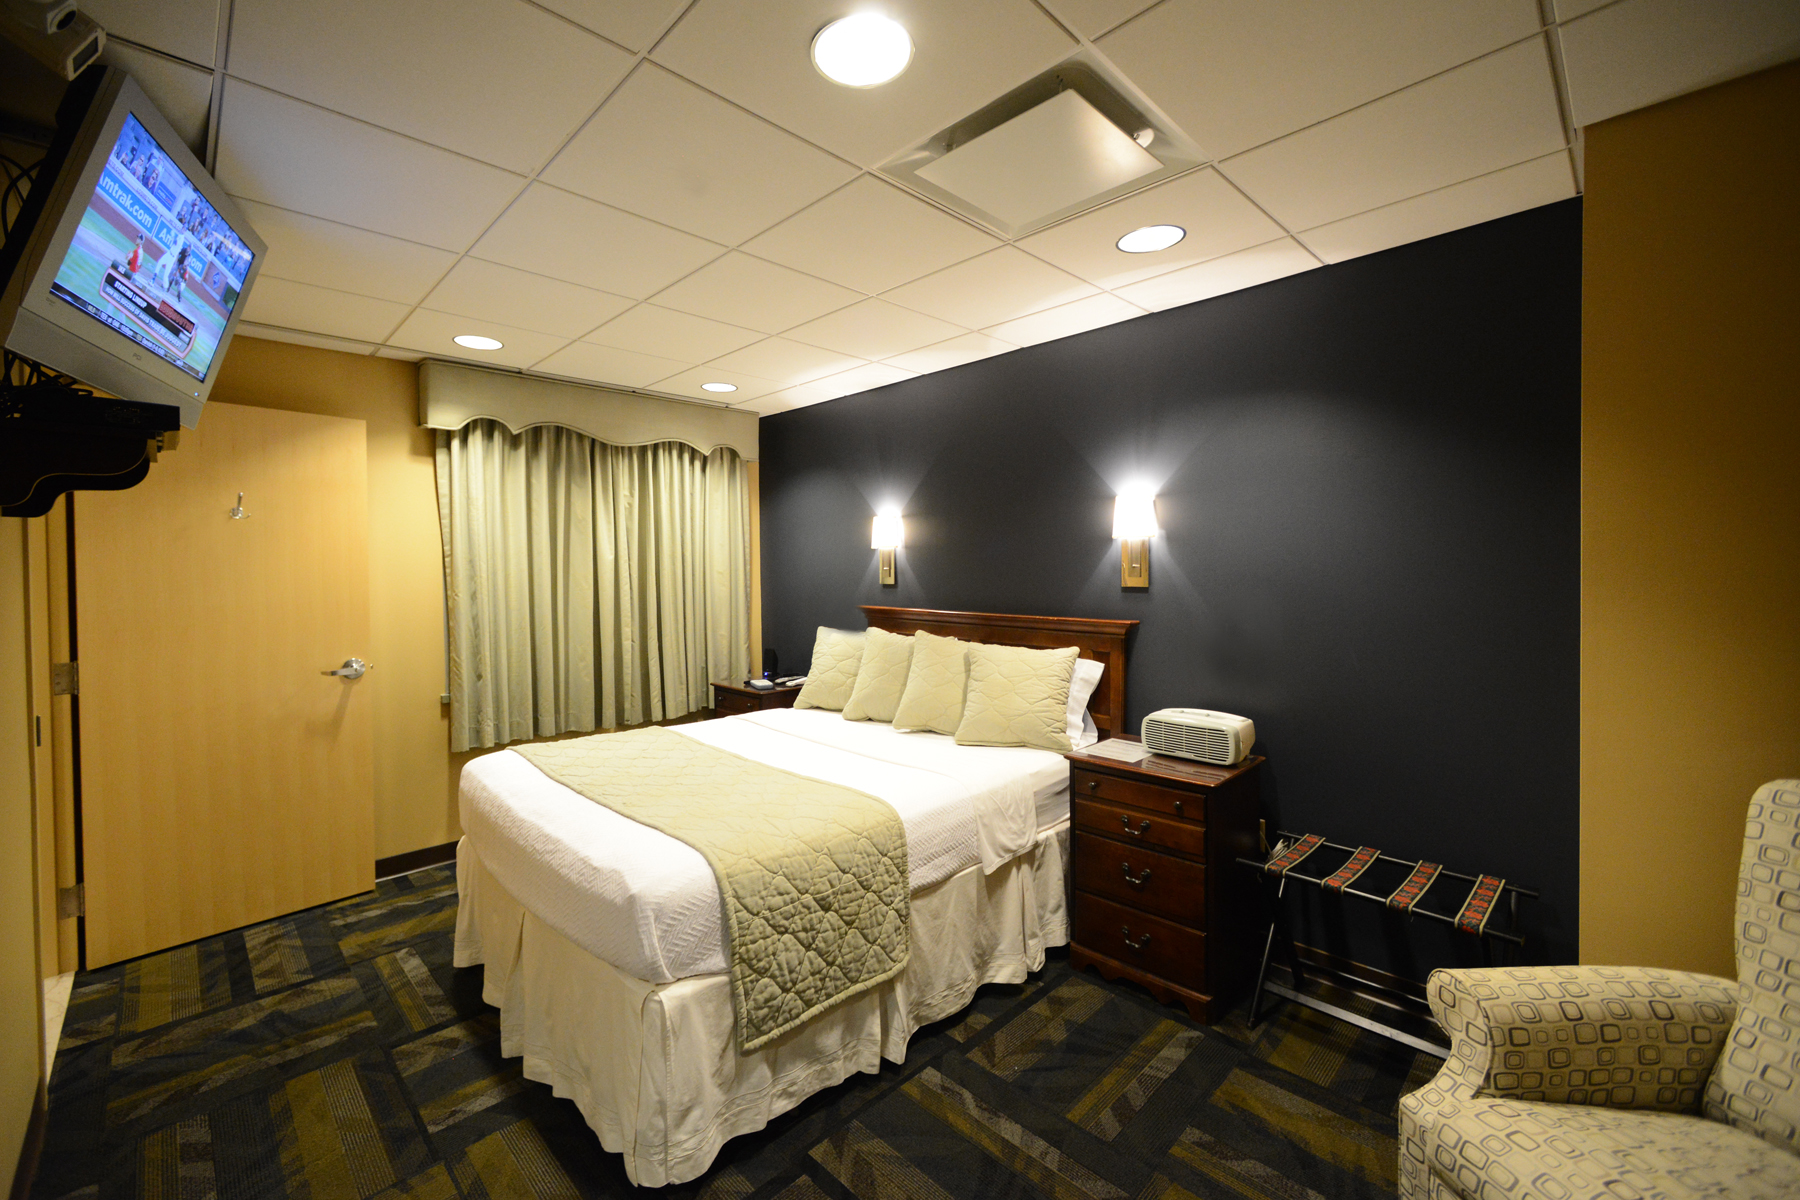 A private sleep study room at Valley's Center for Sleep Medicine